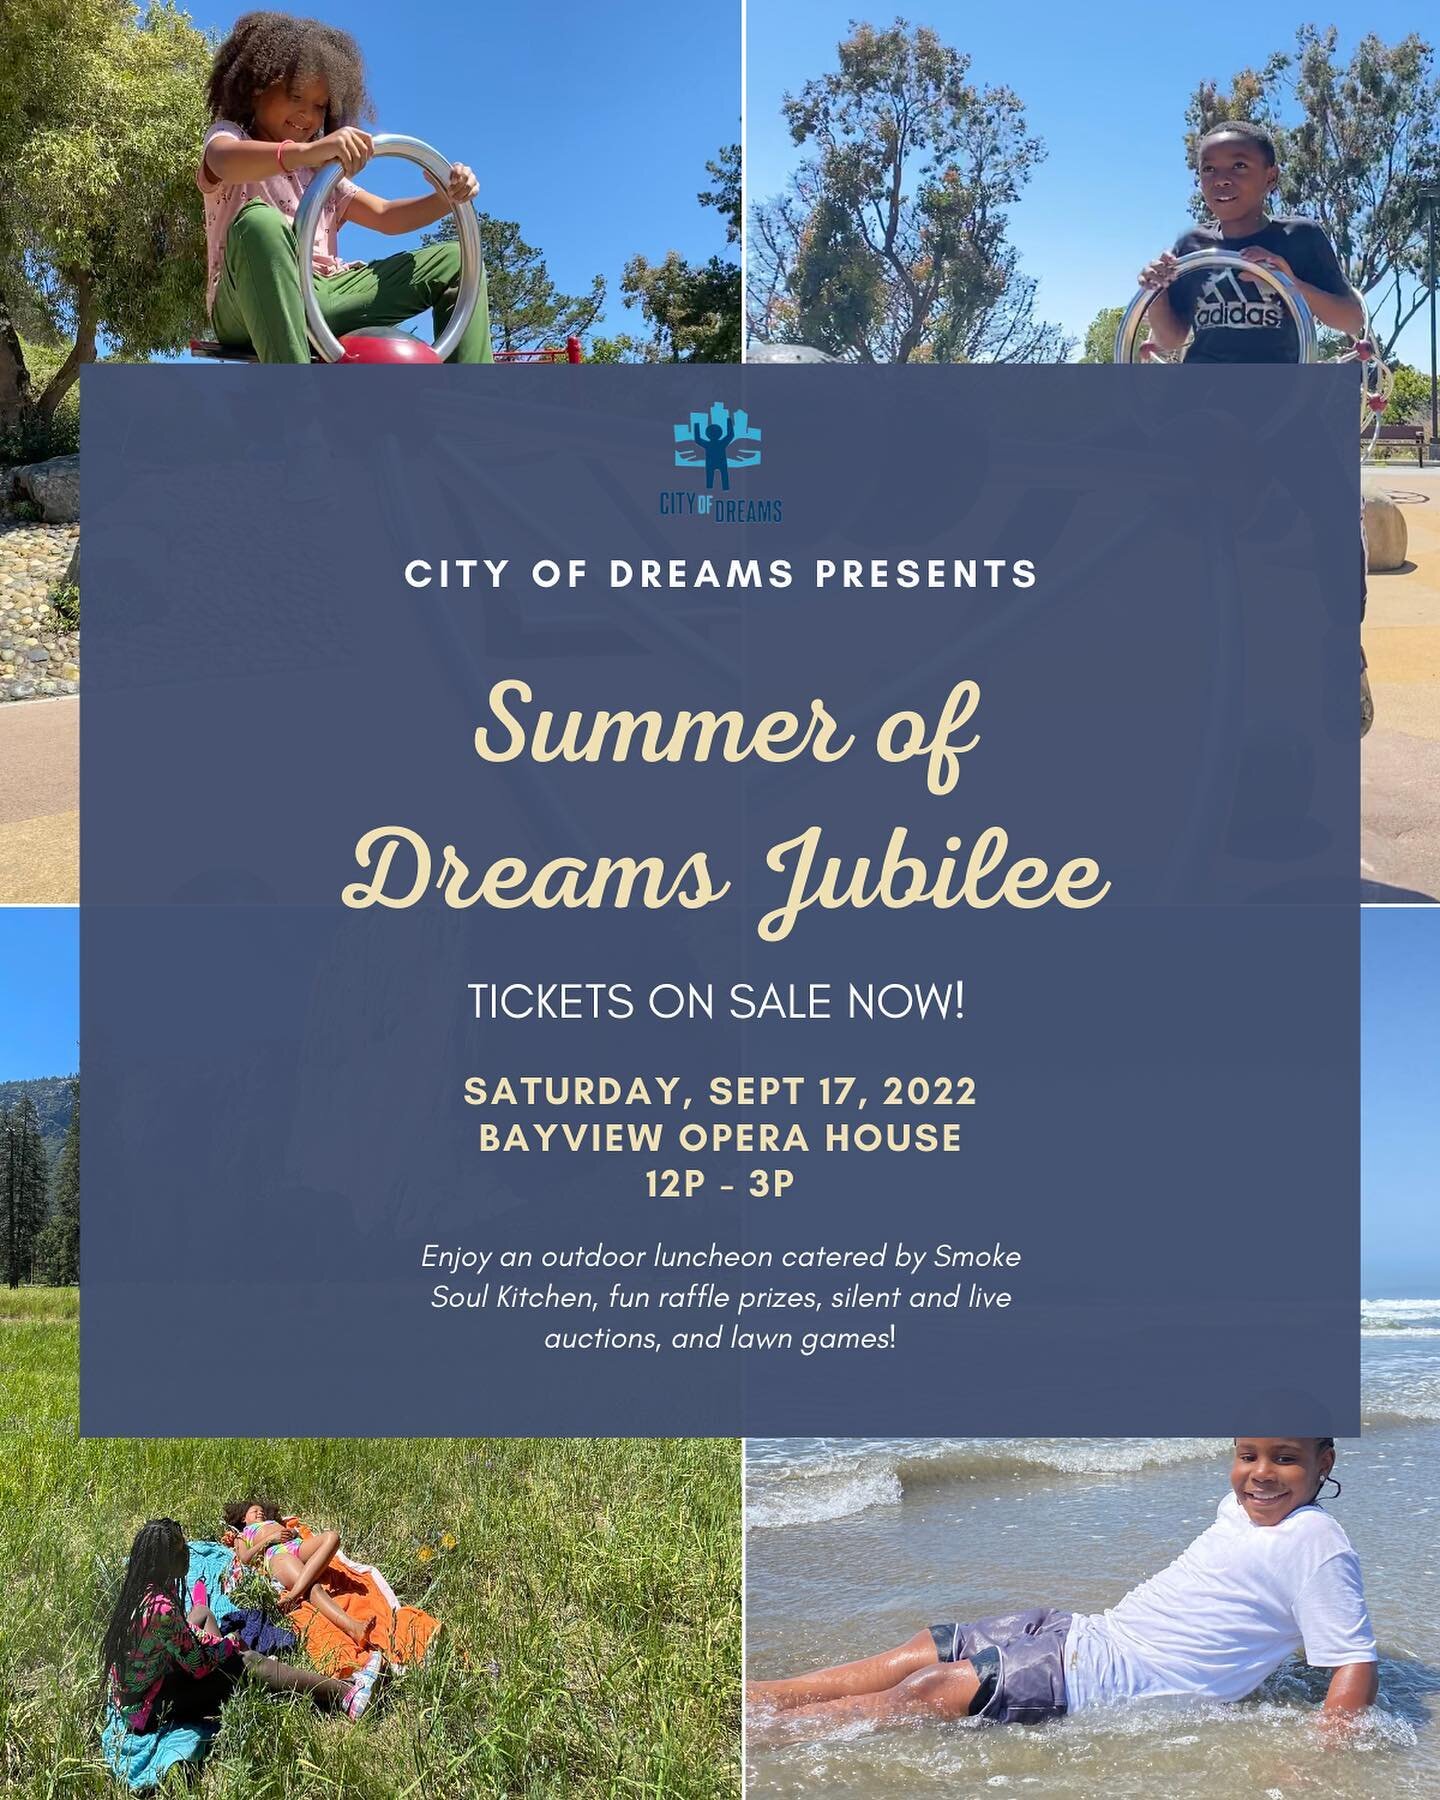 YOU&rsquo;RE INVITED!📩

City of Dreams would like to cordially invite you to our Summer of Dreams Jubilee! ☀️ This is our largest annual fundraiser benefiting underserved youth living in Bayview&rsquo;s public housing communities. 

📆 Saturday, Sep